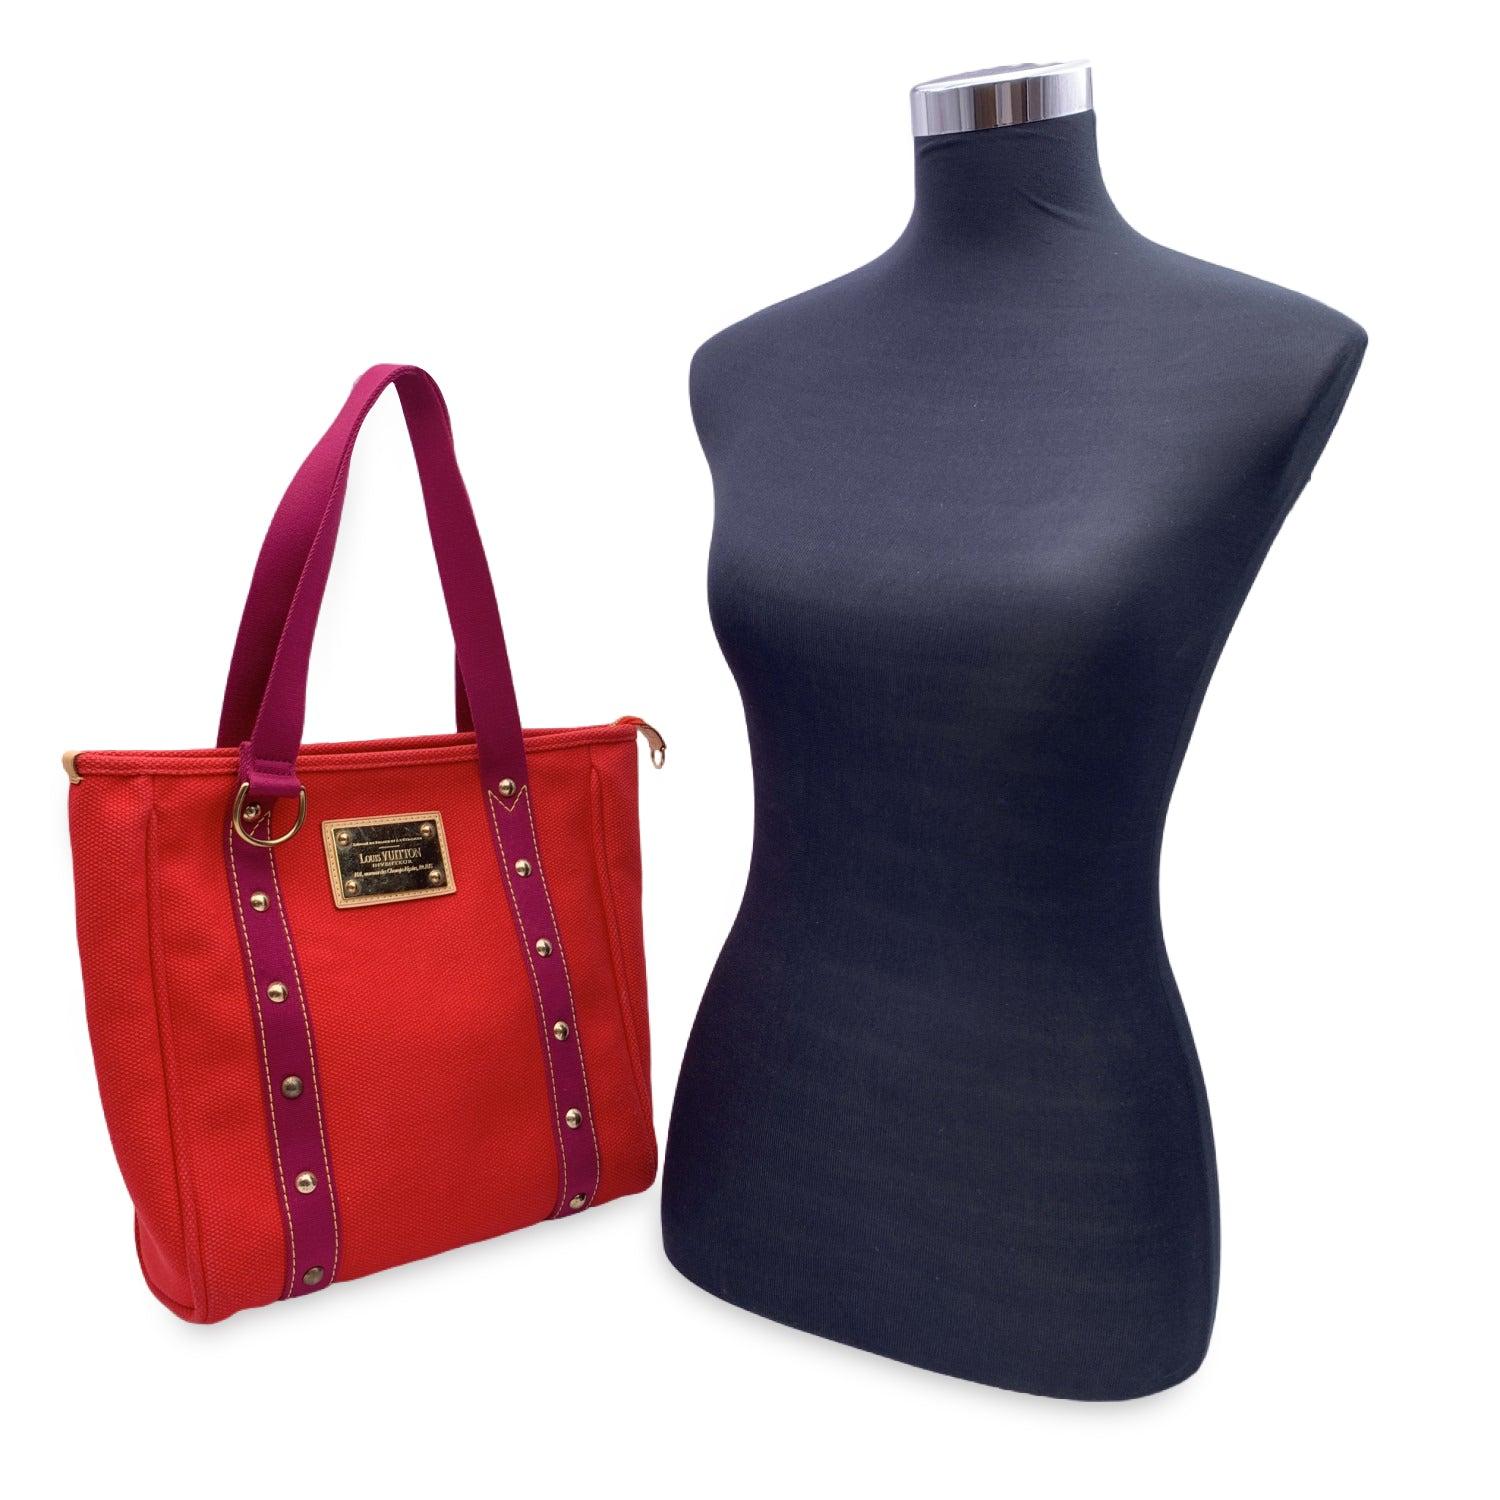 Elegant Louis Vuitton ANTIGUA Tote. The bag is crafted of red canvas with magenta trim and handles. The line it is inspired by a nautical style infact the collection is named after the Caribbean island, known for its yacht races. This model features